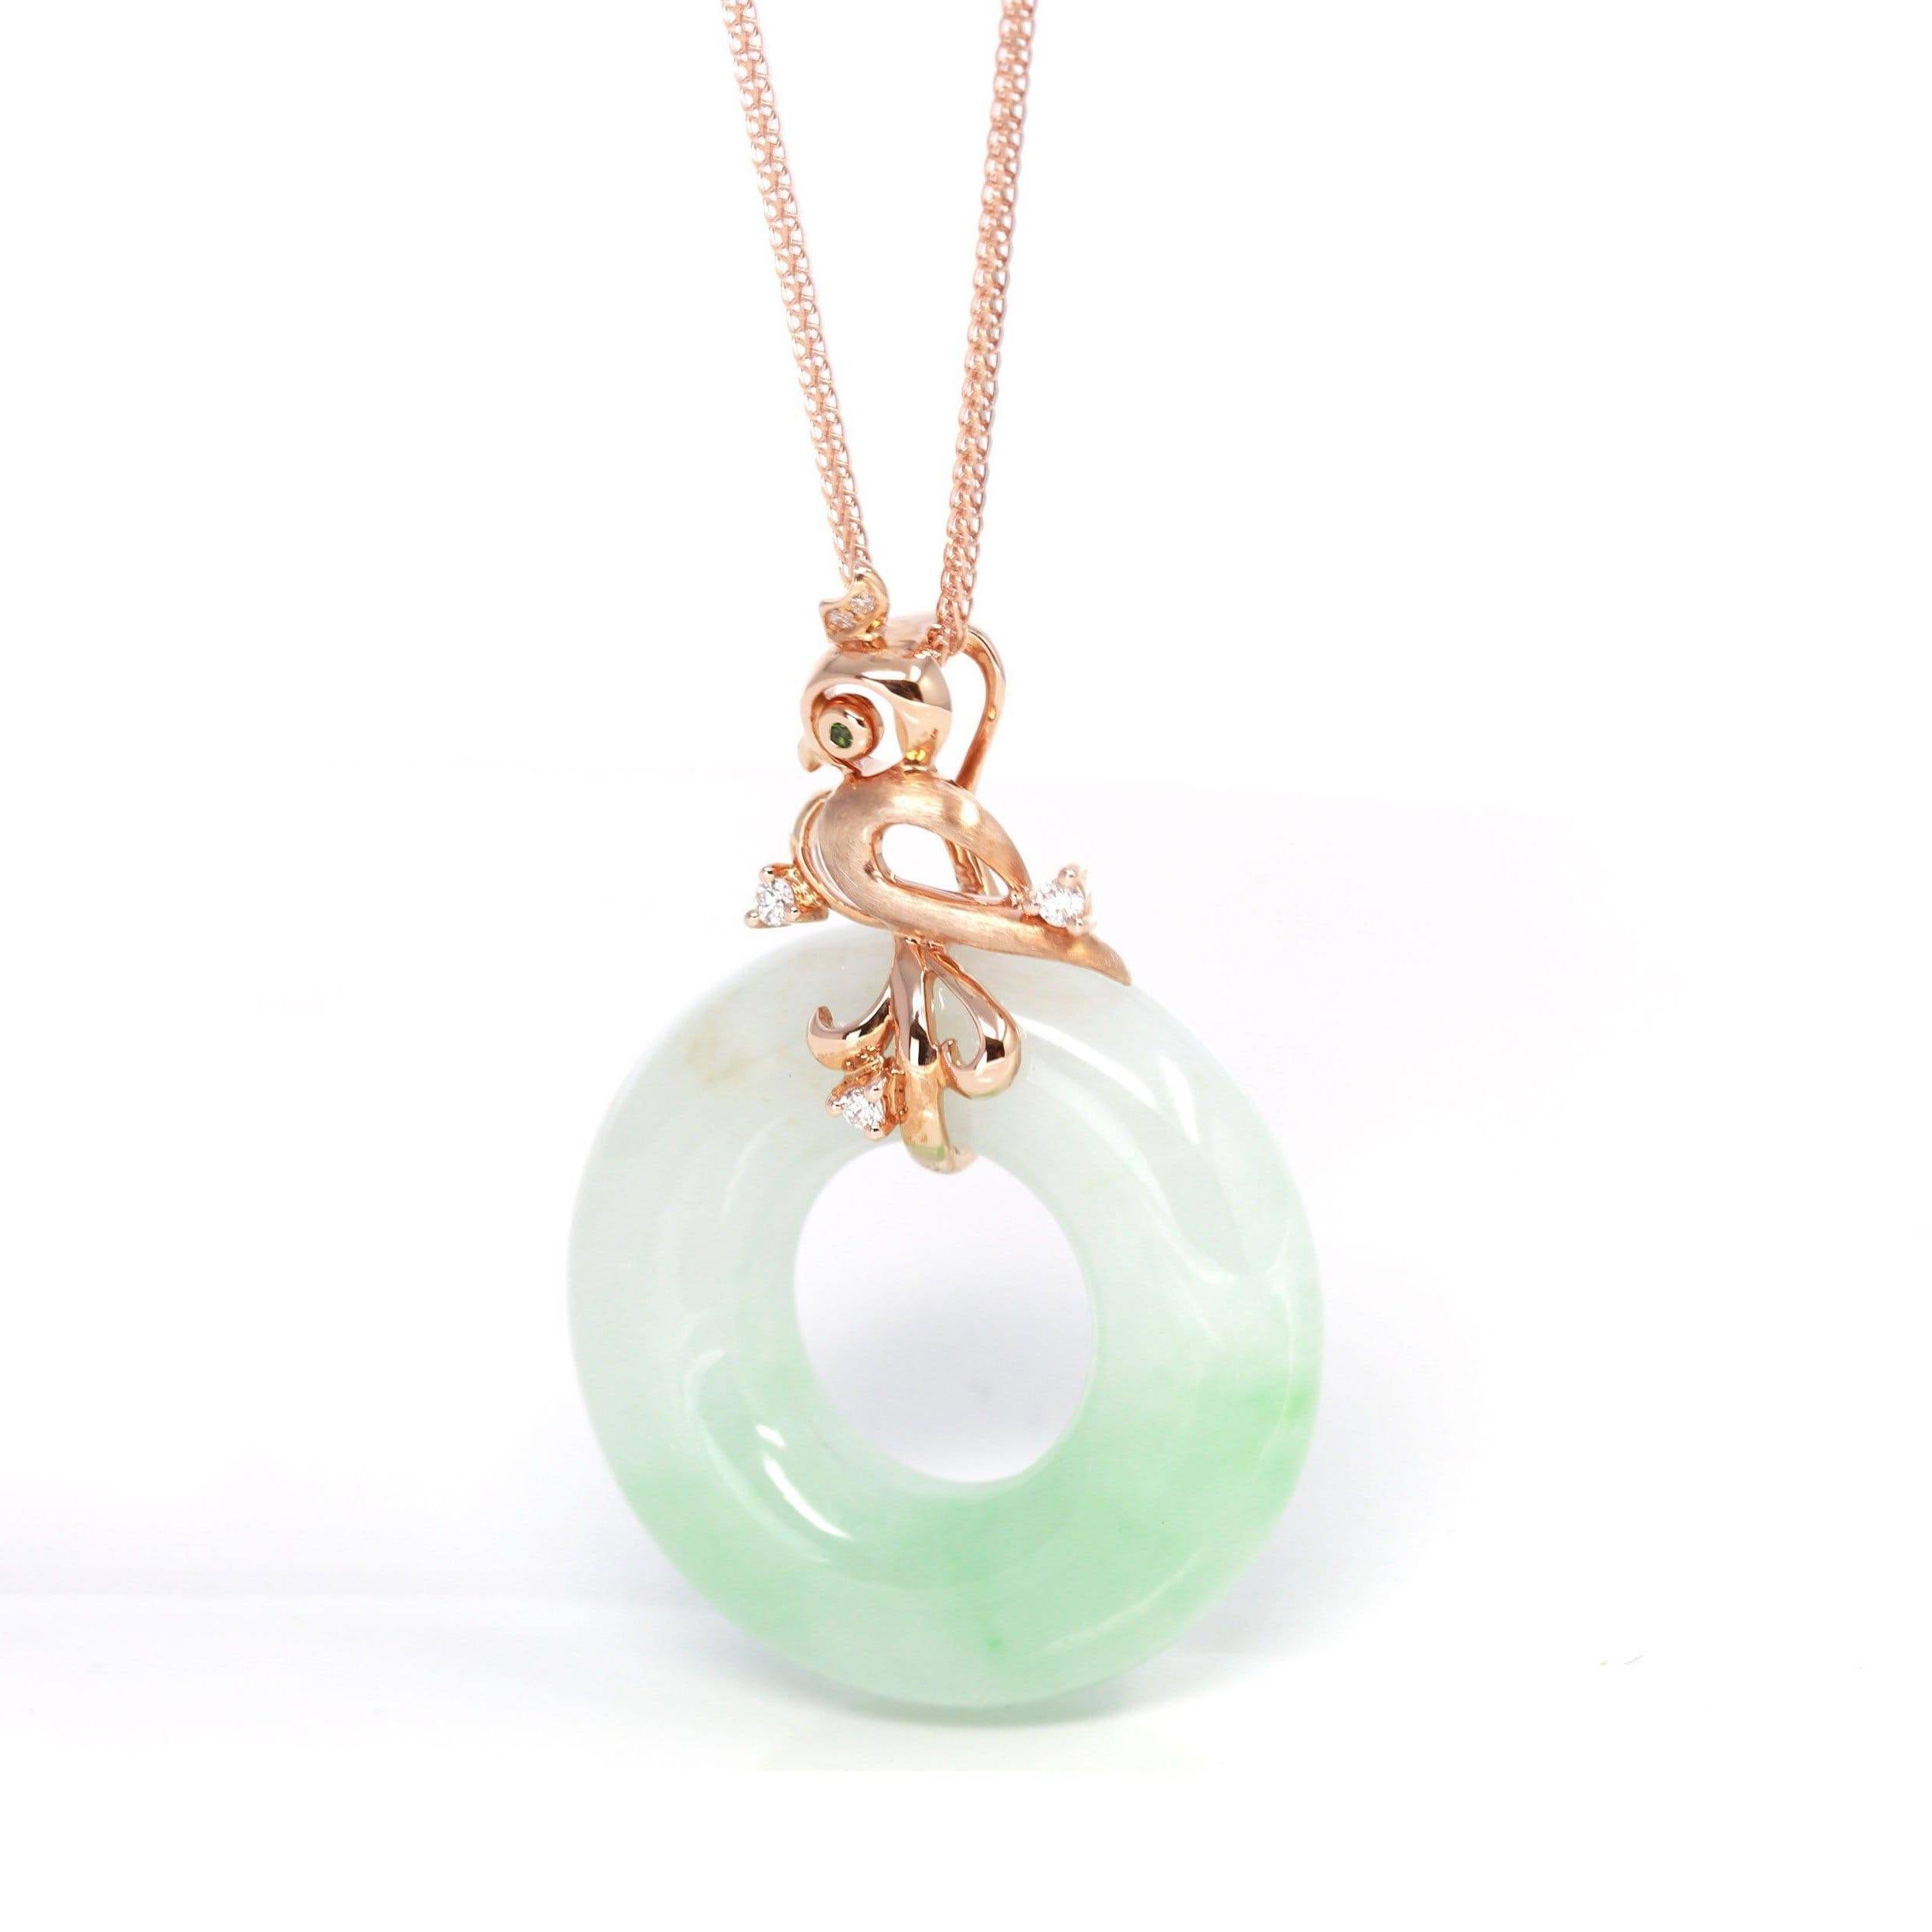 DESIGN CONCEPT--- 18k Rose Gold & Genuine Burmese Jadeite Pendant Necklace With AA quality Tourmaline and Diamonds. This pendant is made with high-quality genuine jadeite with some vibrant green, the jadeite piece looks so clean and smooth without